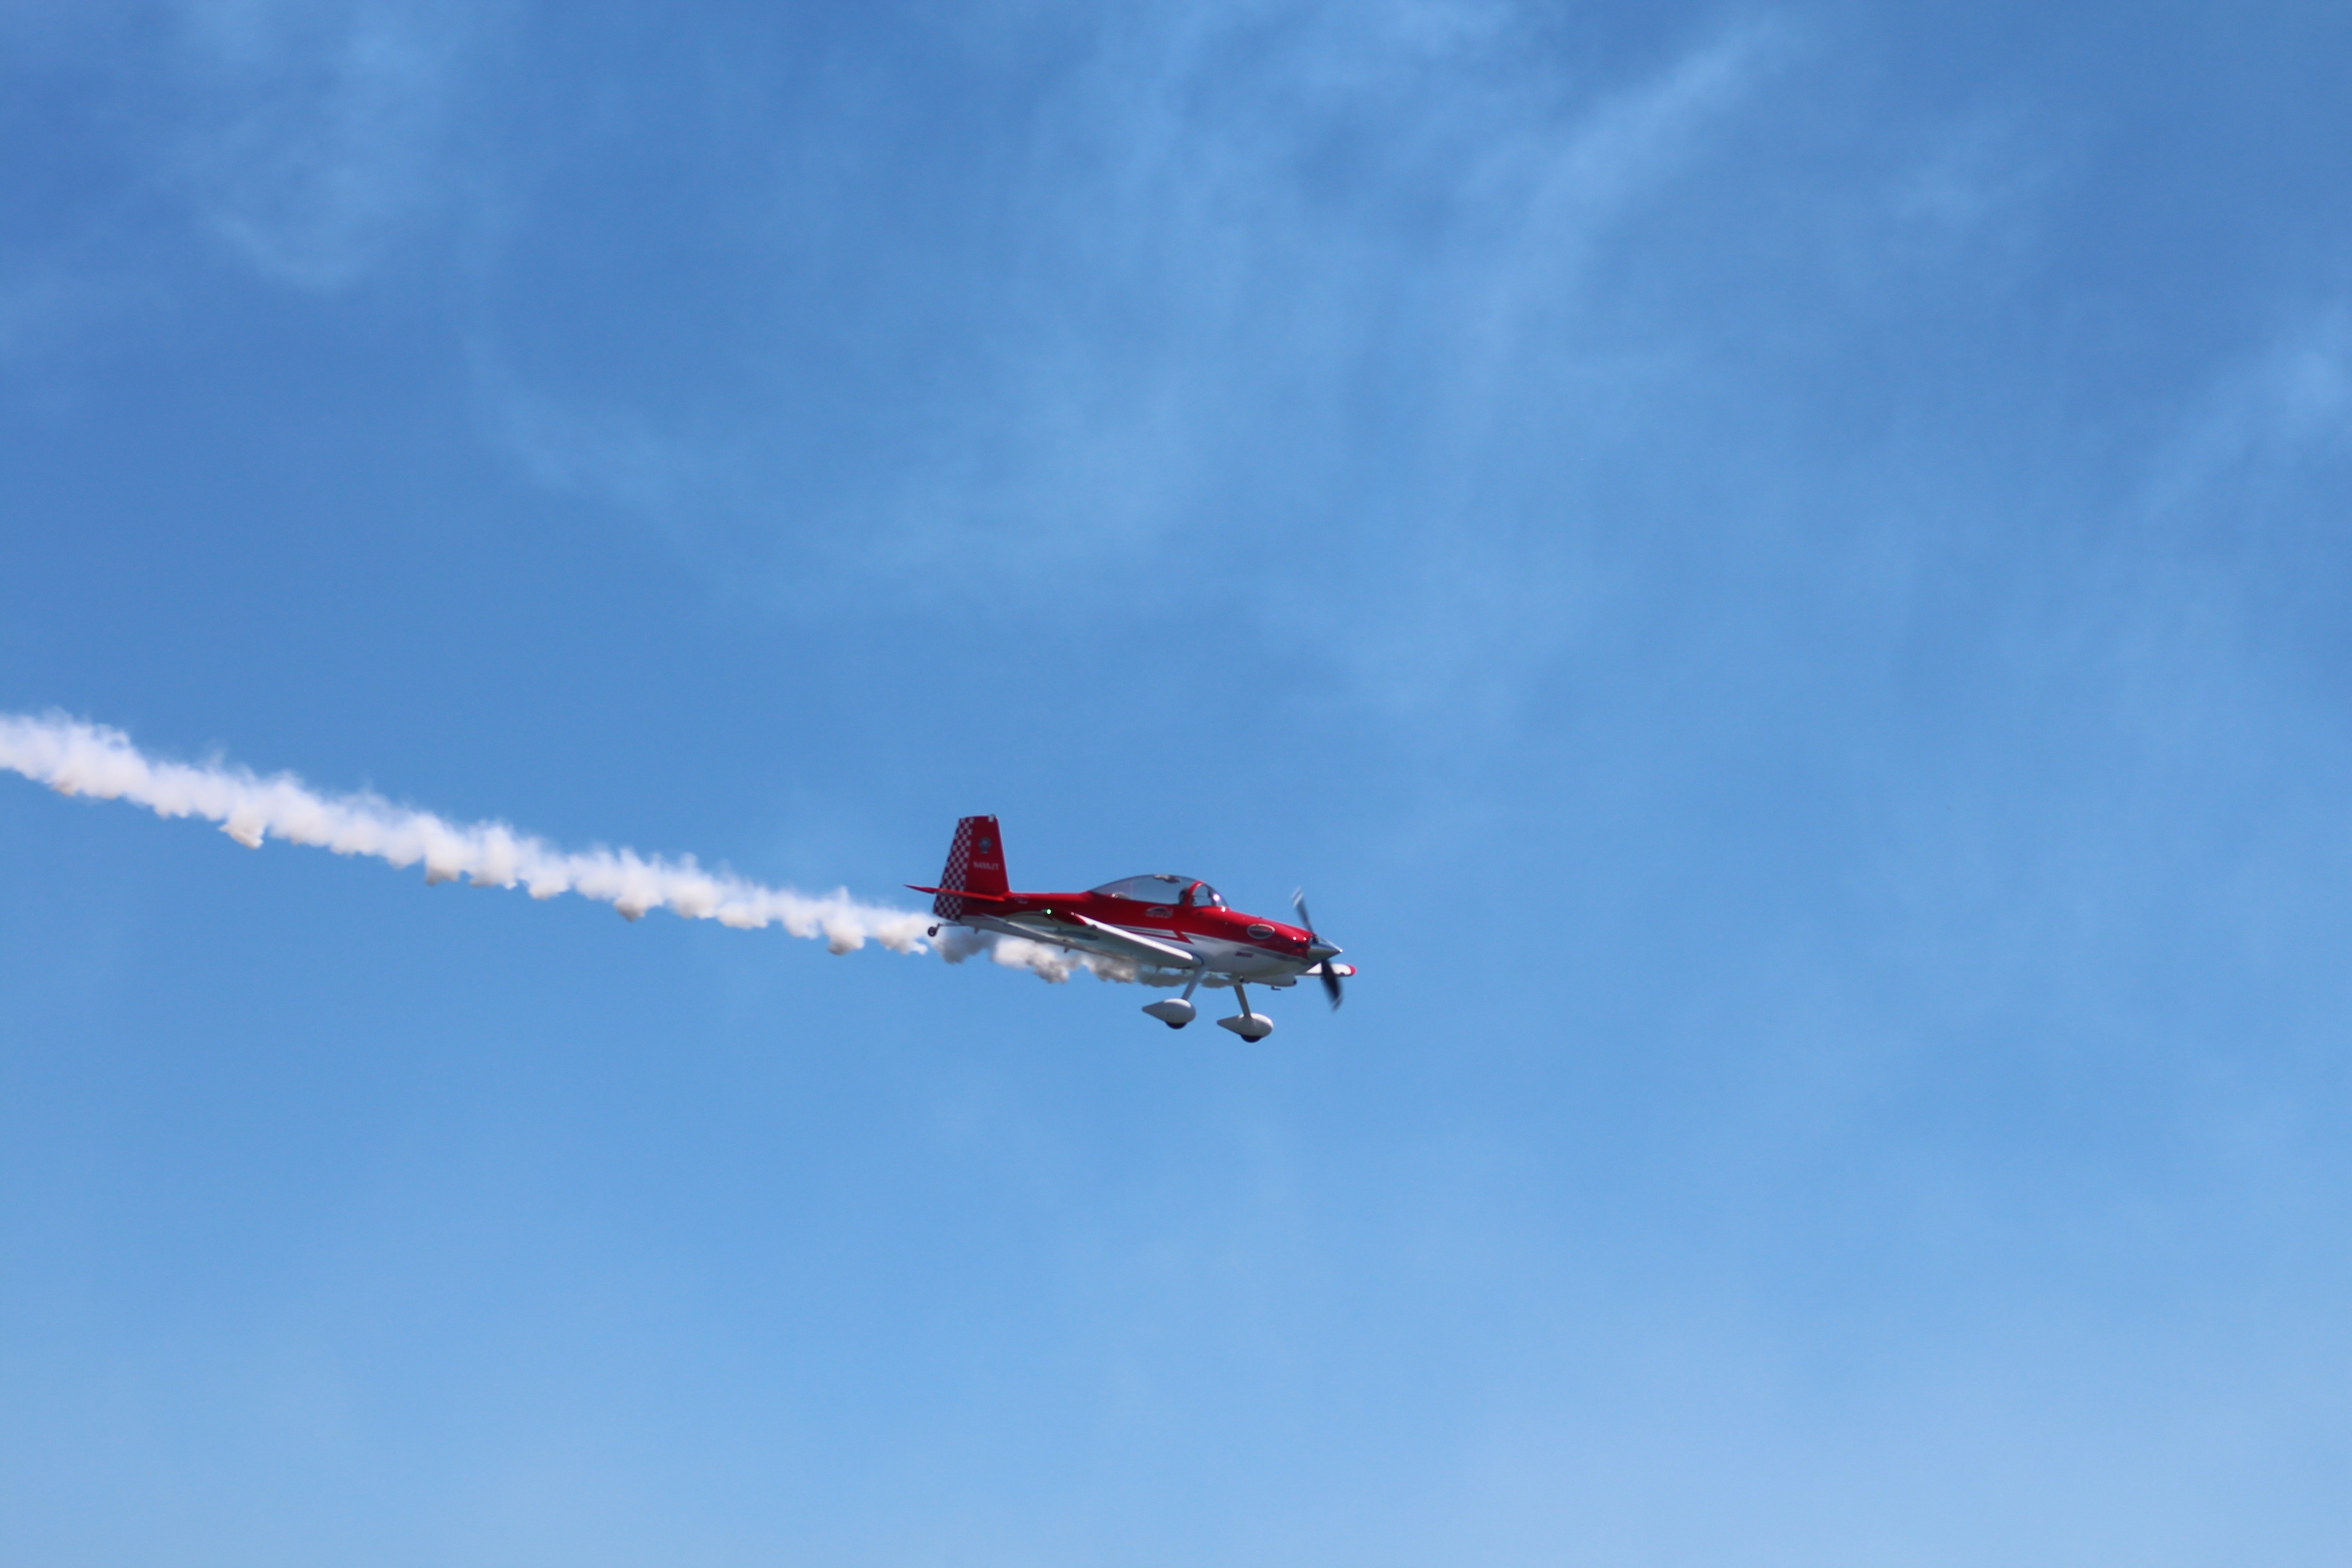 red and white biplane with tail smoke in flight during daytime